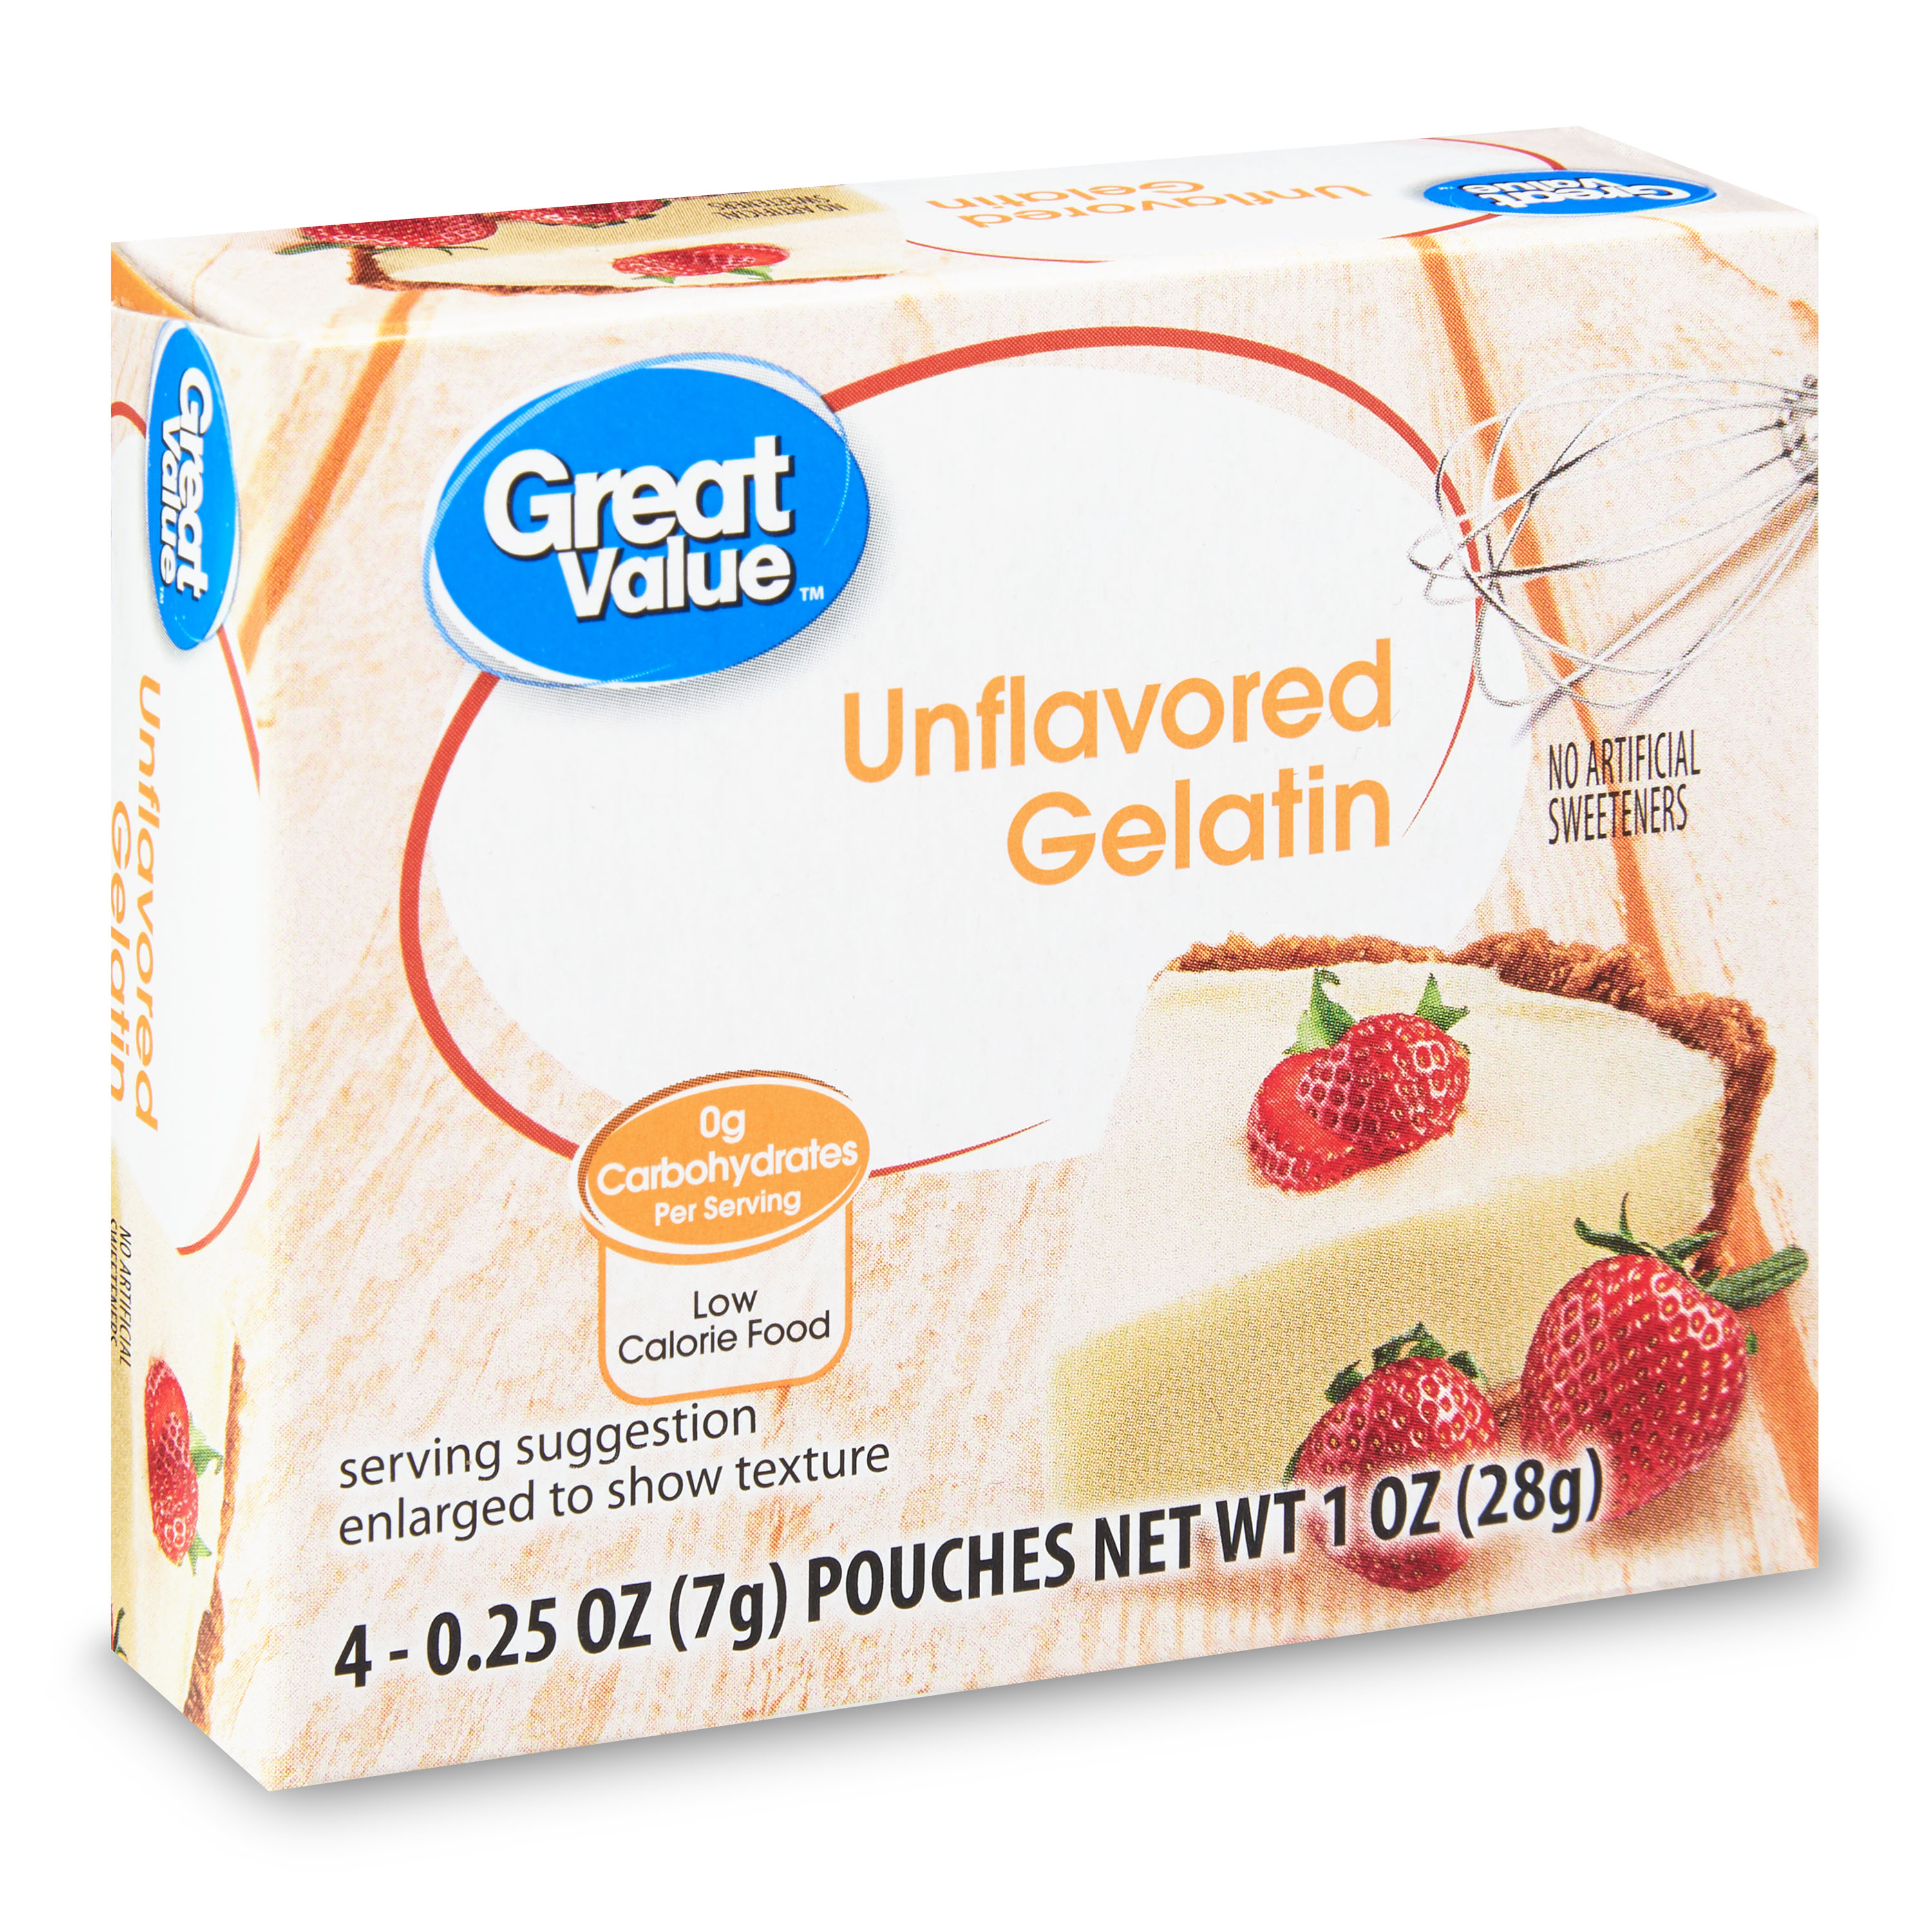 Great Value Unflavored Gelatin, 0.25 Oz, 4 Count